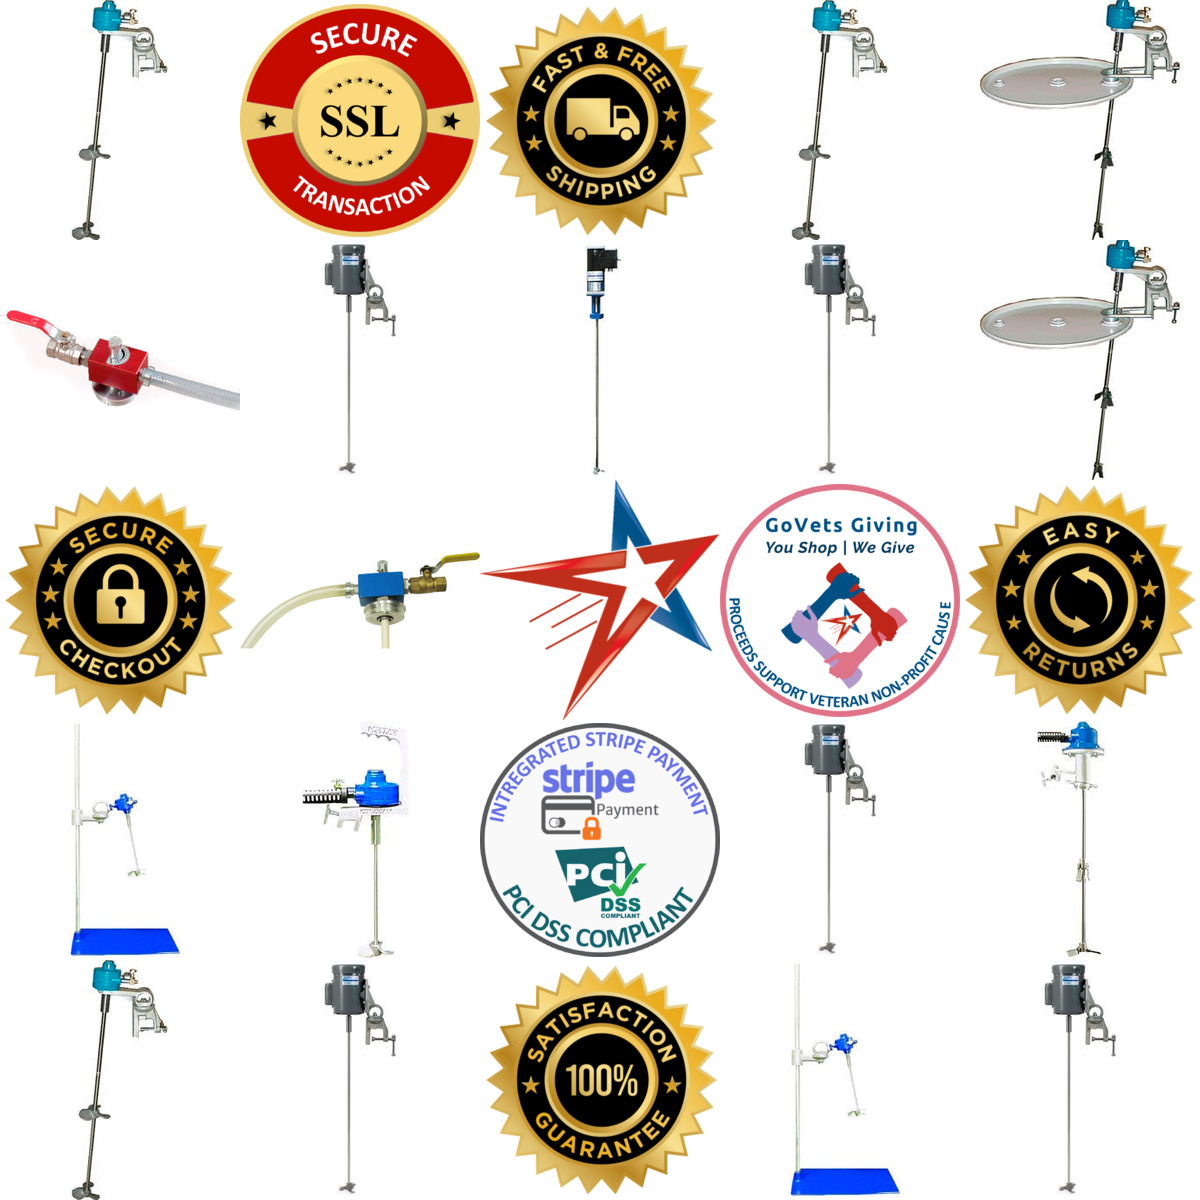 A selection of Drum Mixers products on GoVets